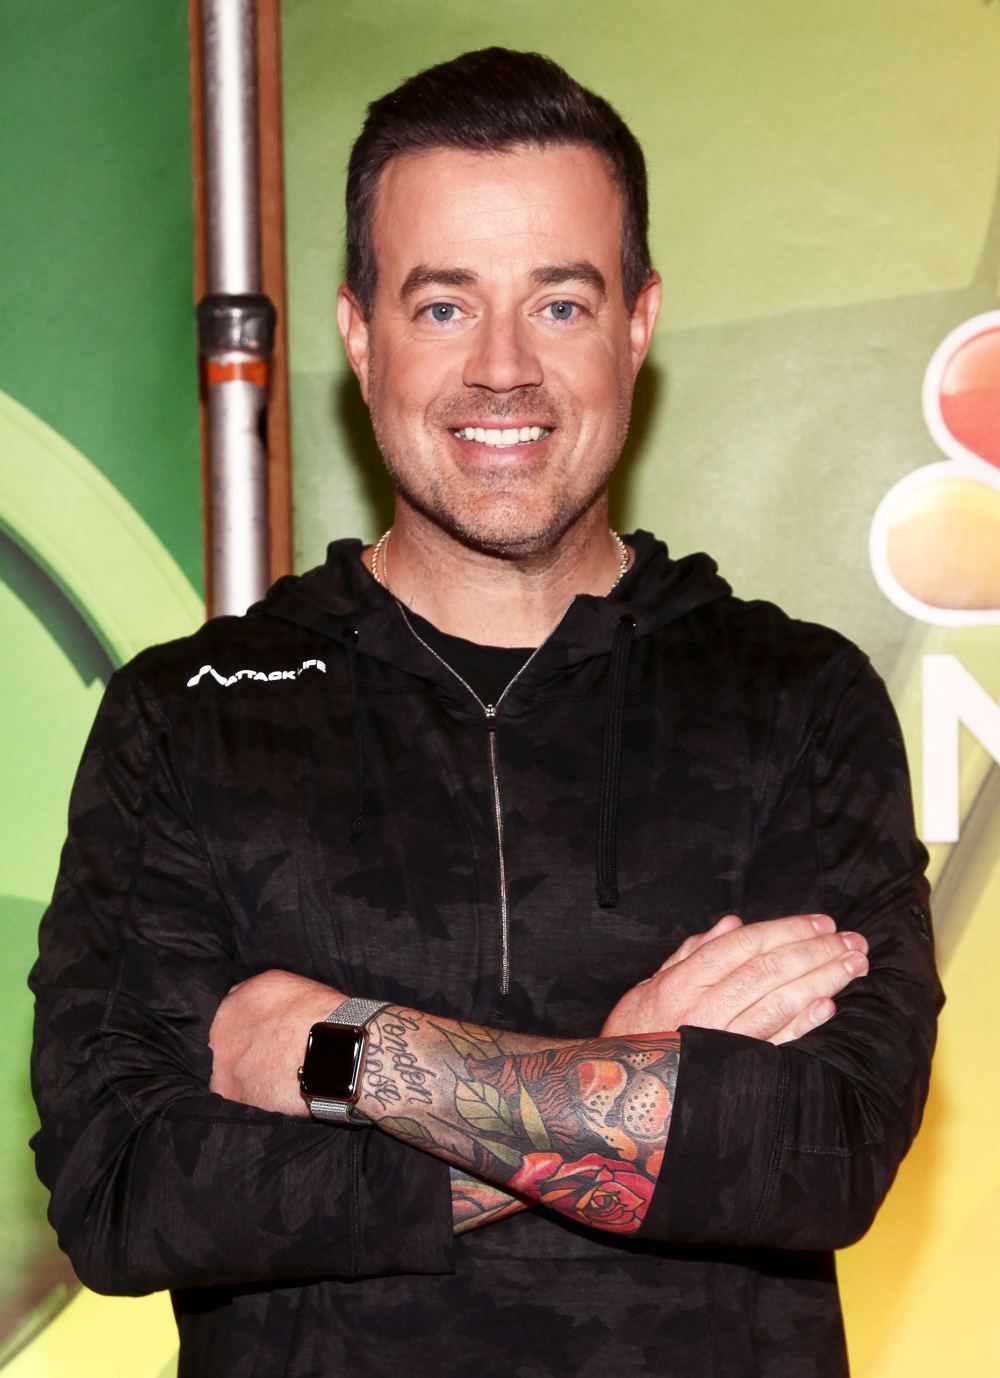 Carson Daly Shows Off His Inventive At-Home Broadcast Center